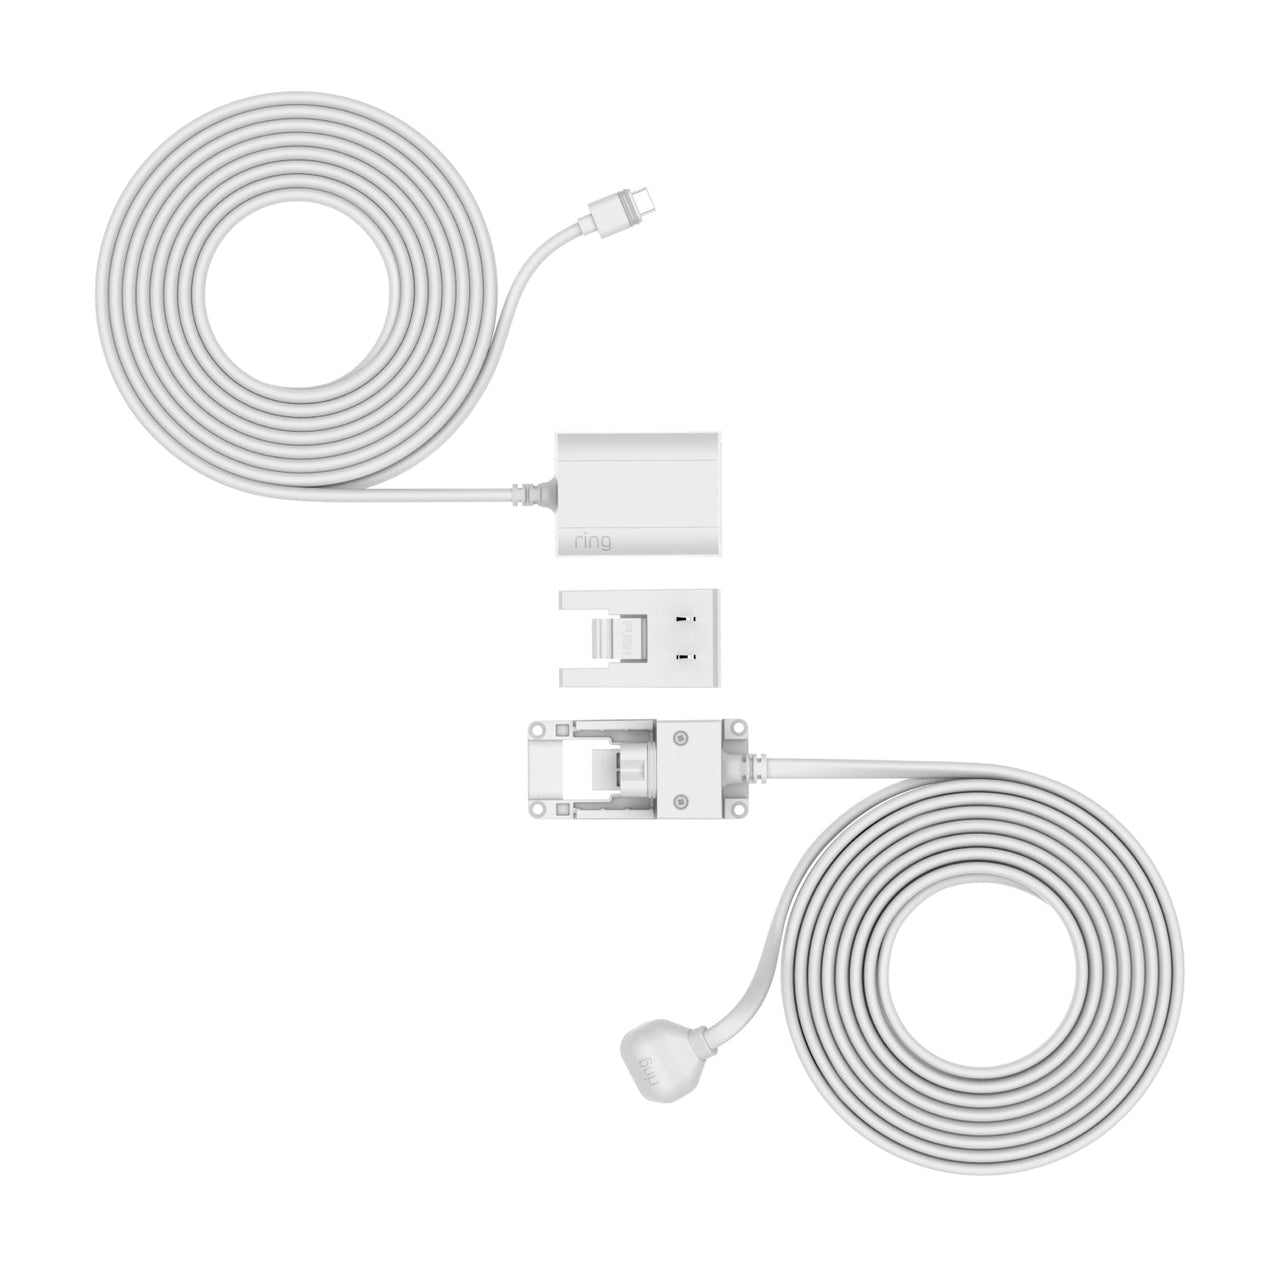 products/ring_indoor_outdoor_power_adapter_usb-c_separate_wht_1500x1500_1_af1b9358-d974-474b-a409-8290477cd8b3.jpg